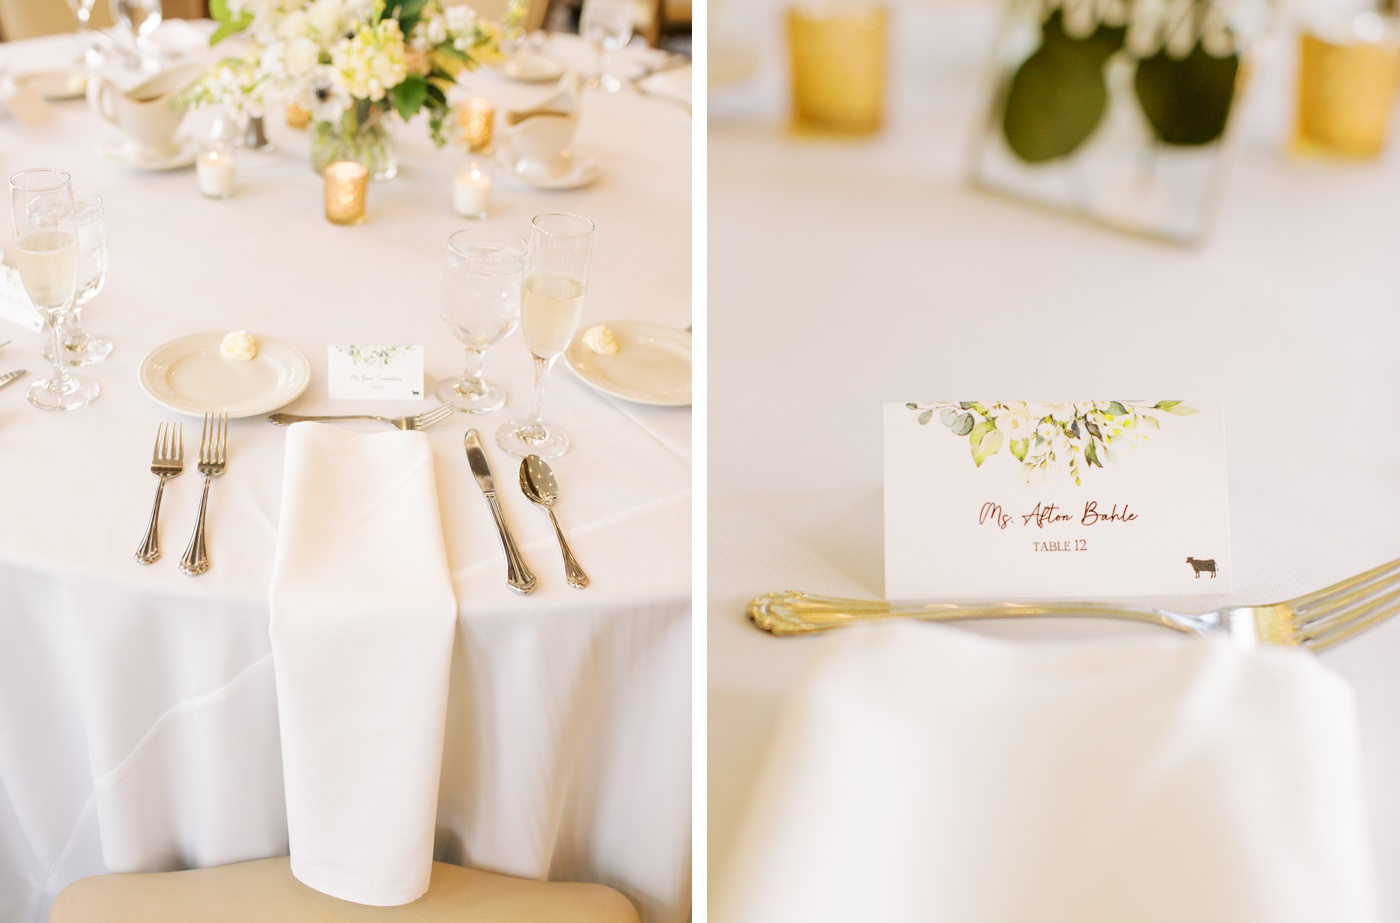 Wedding day stationery items you need